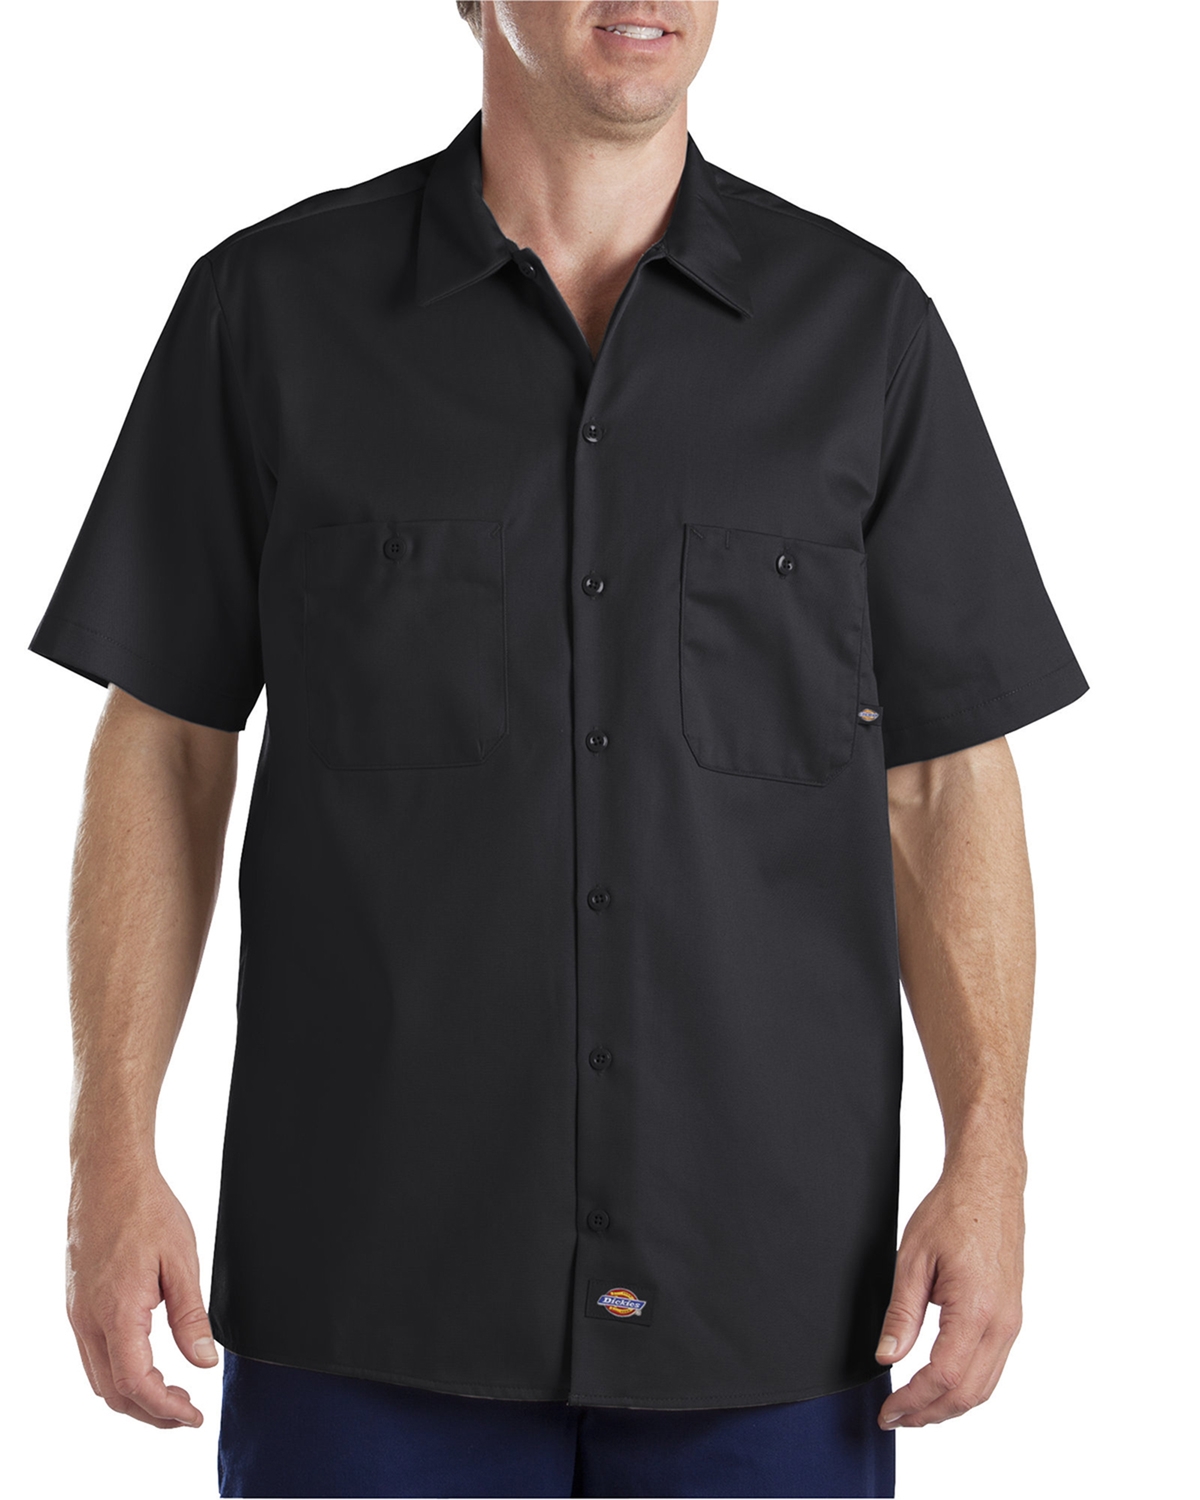 Dickies Snap Button Shirt - from $9.68